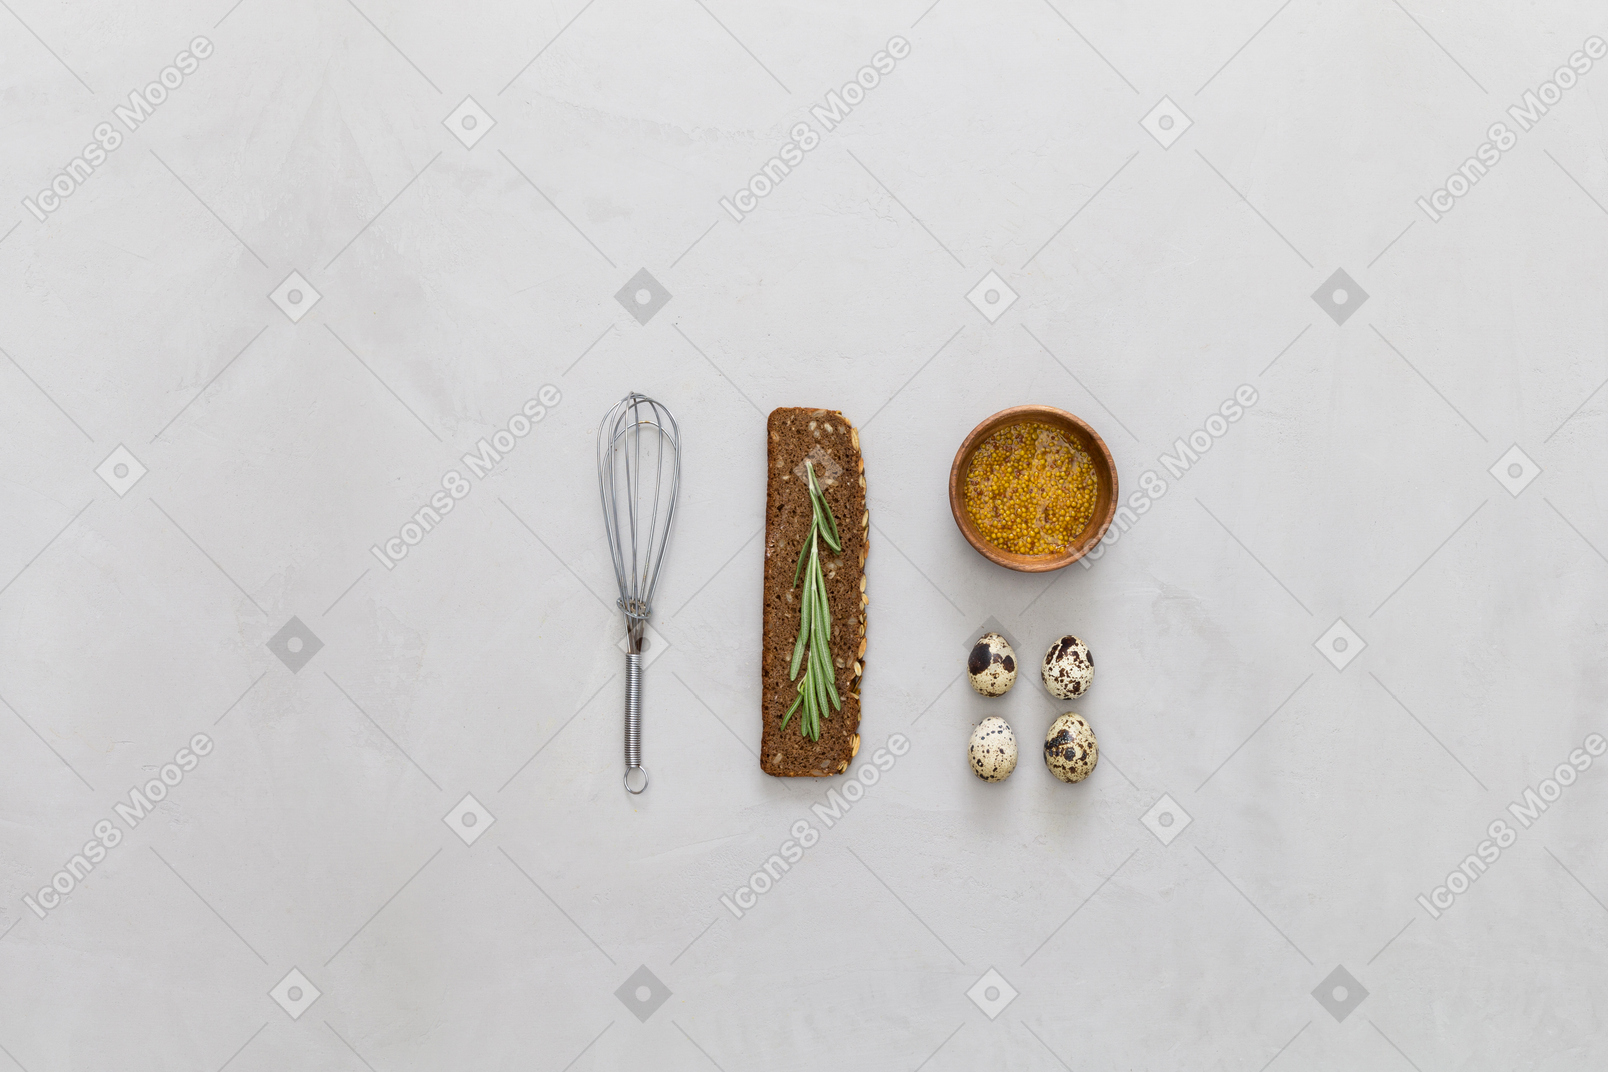 Snack, quail eggs, spices and wire whisk